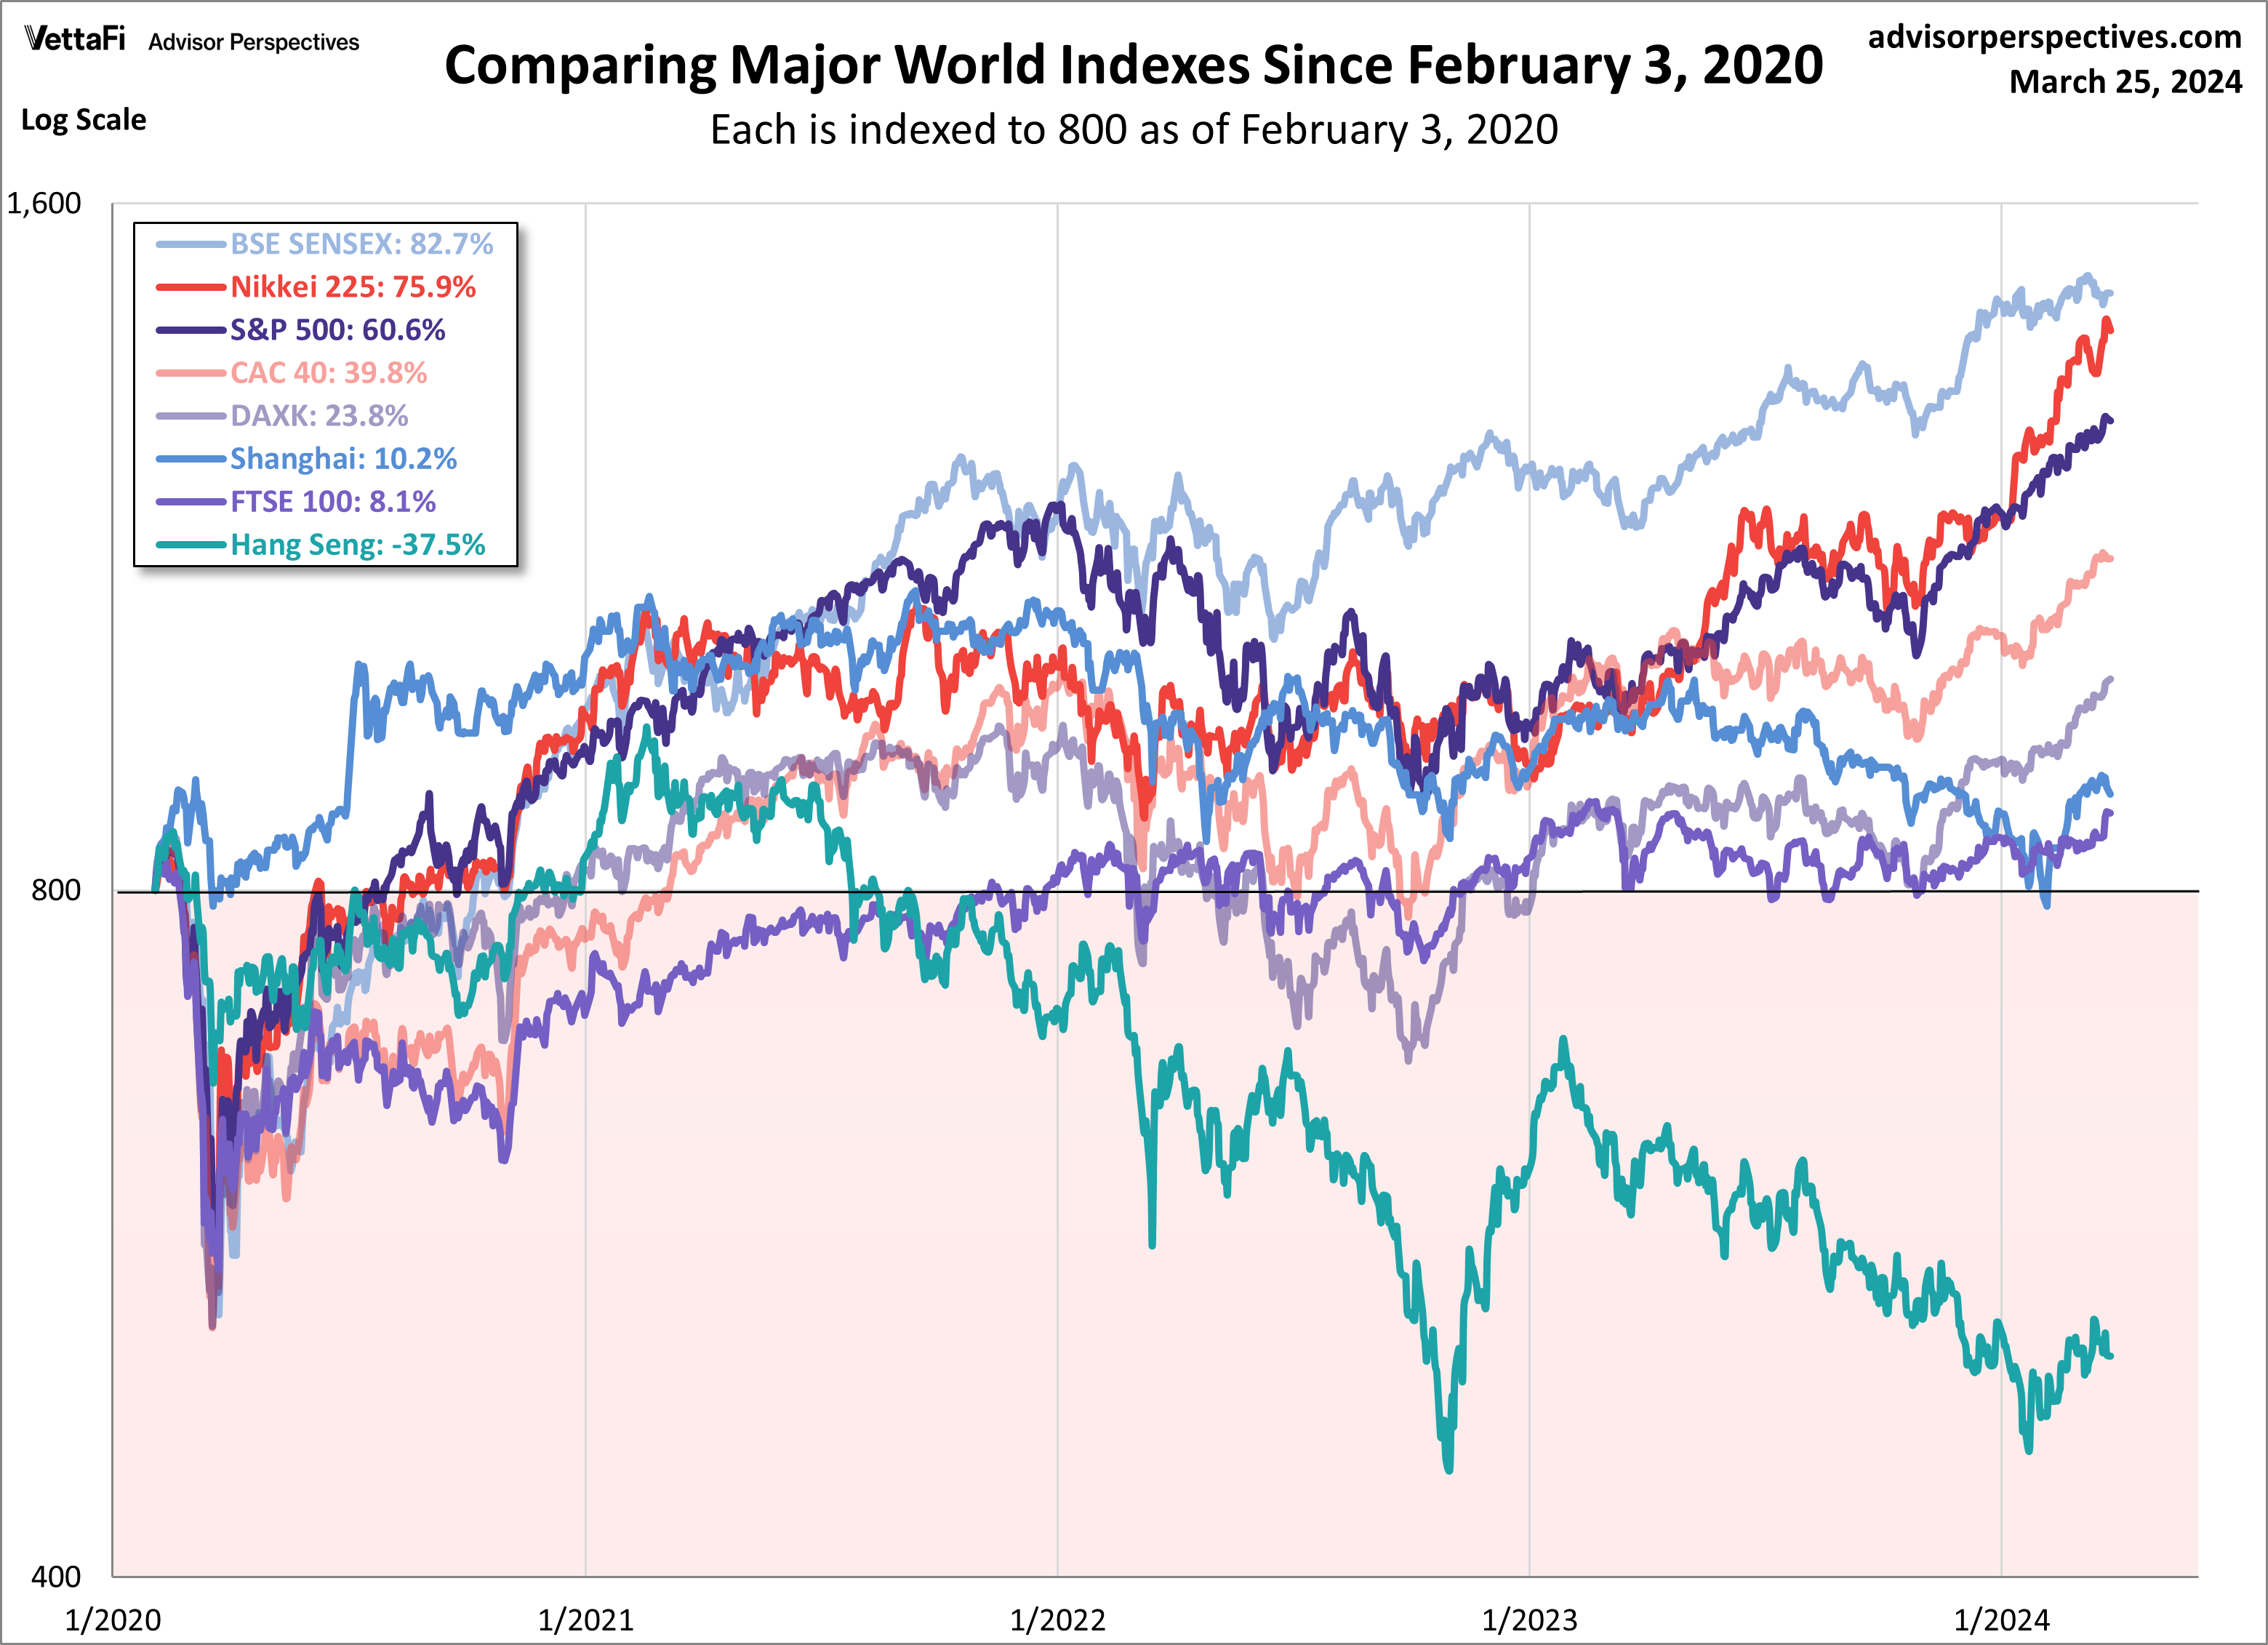 World Indexes Since 2000